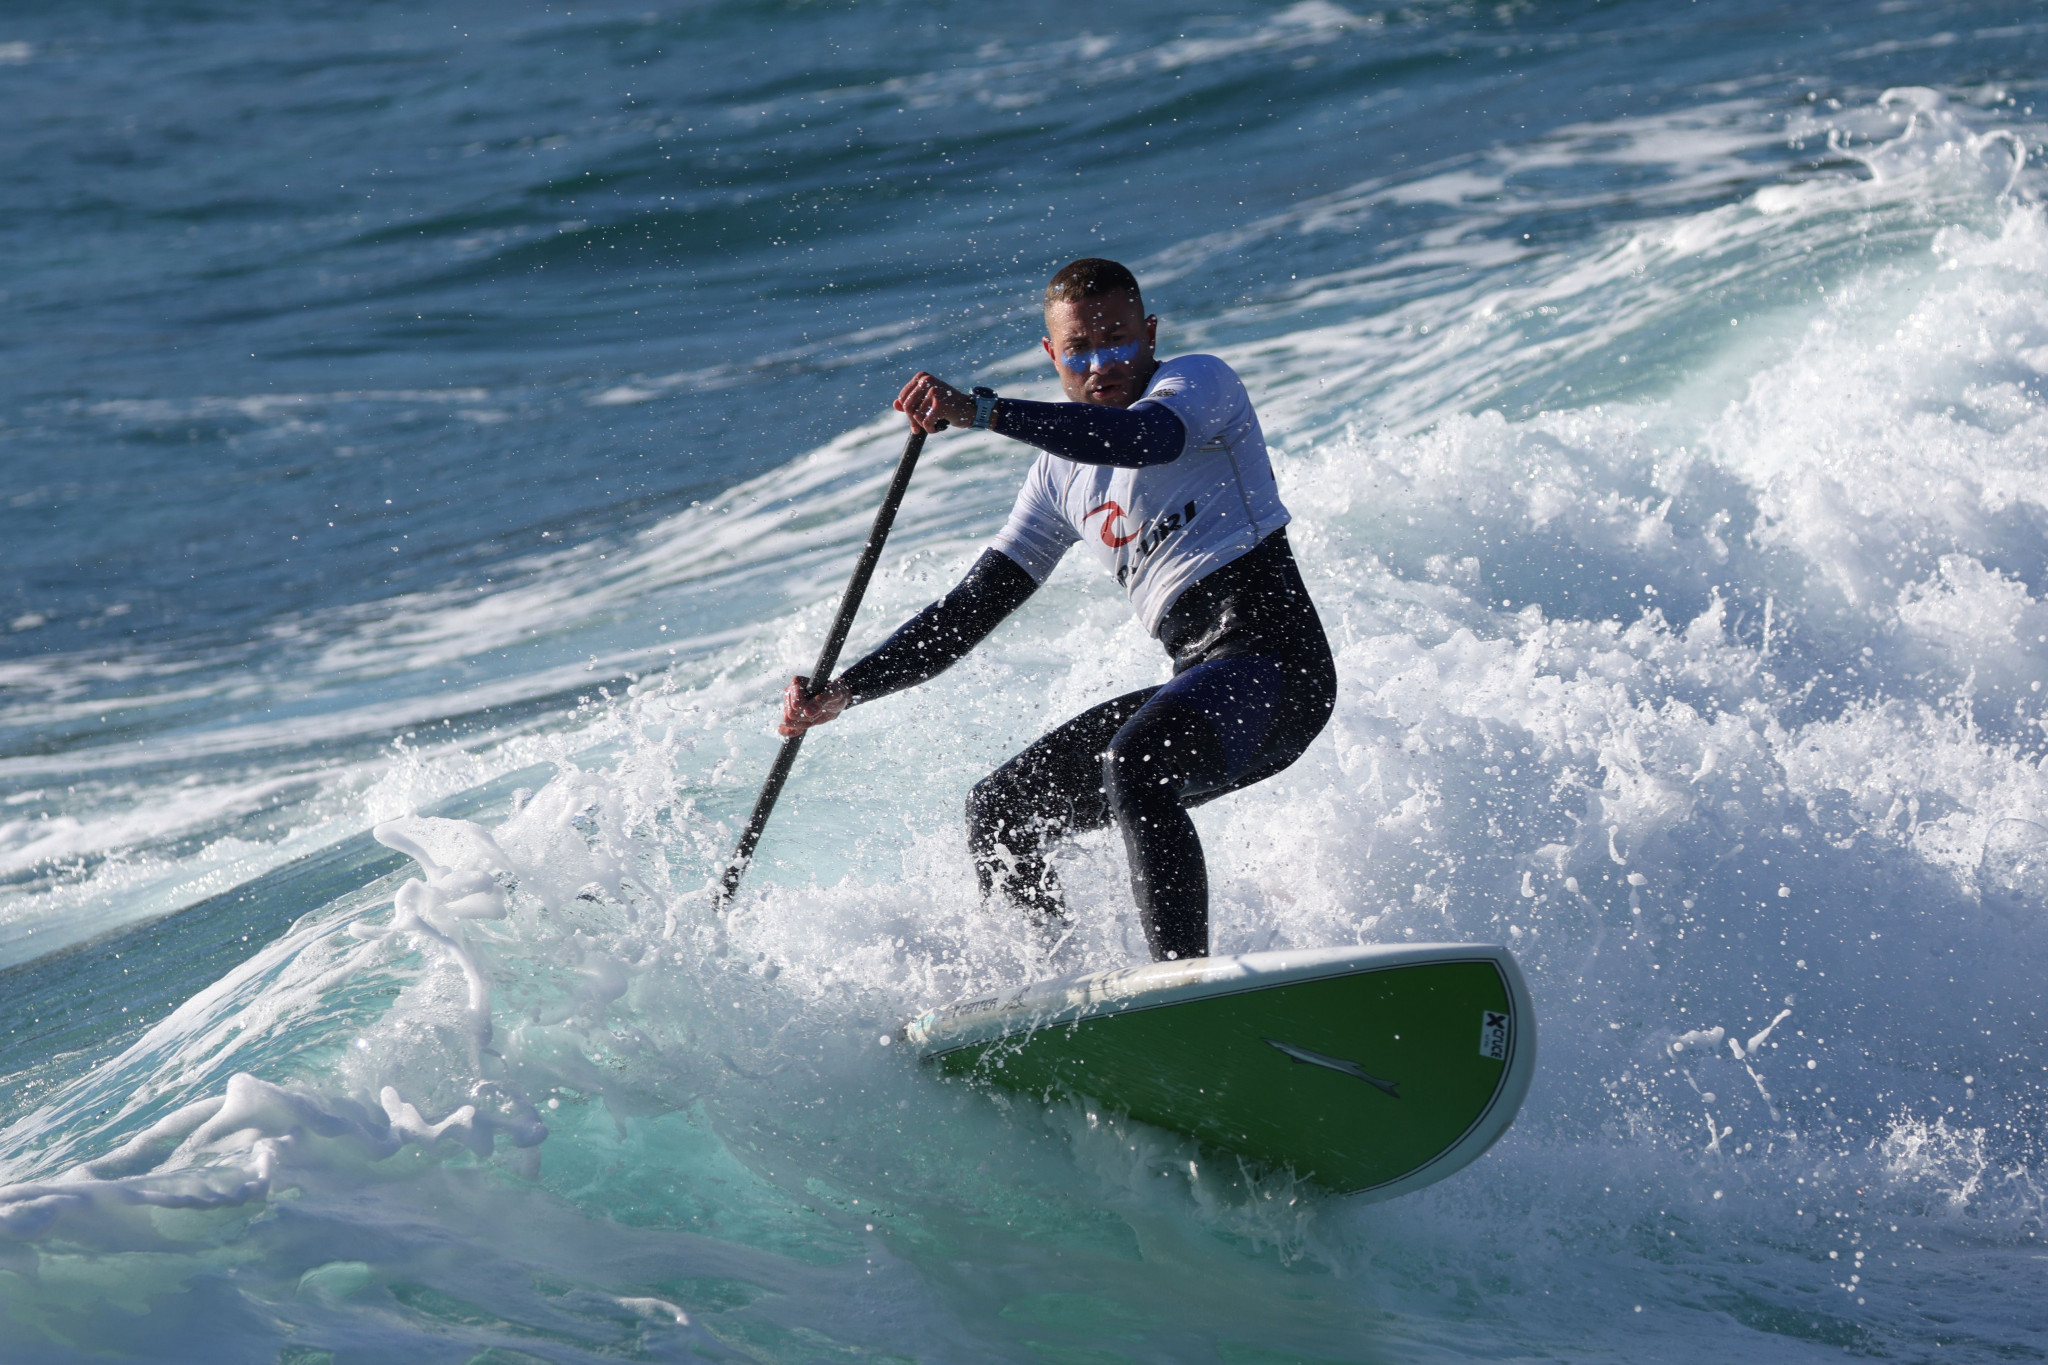 Stand-up paddle rival governing bodies announce major events